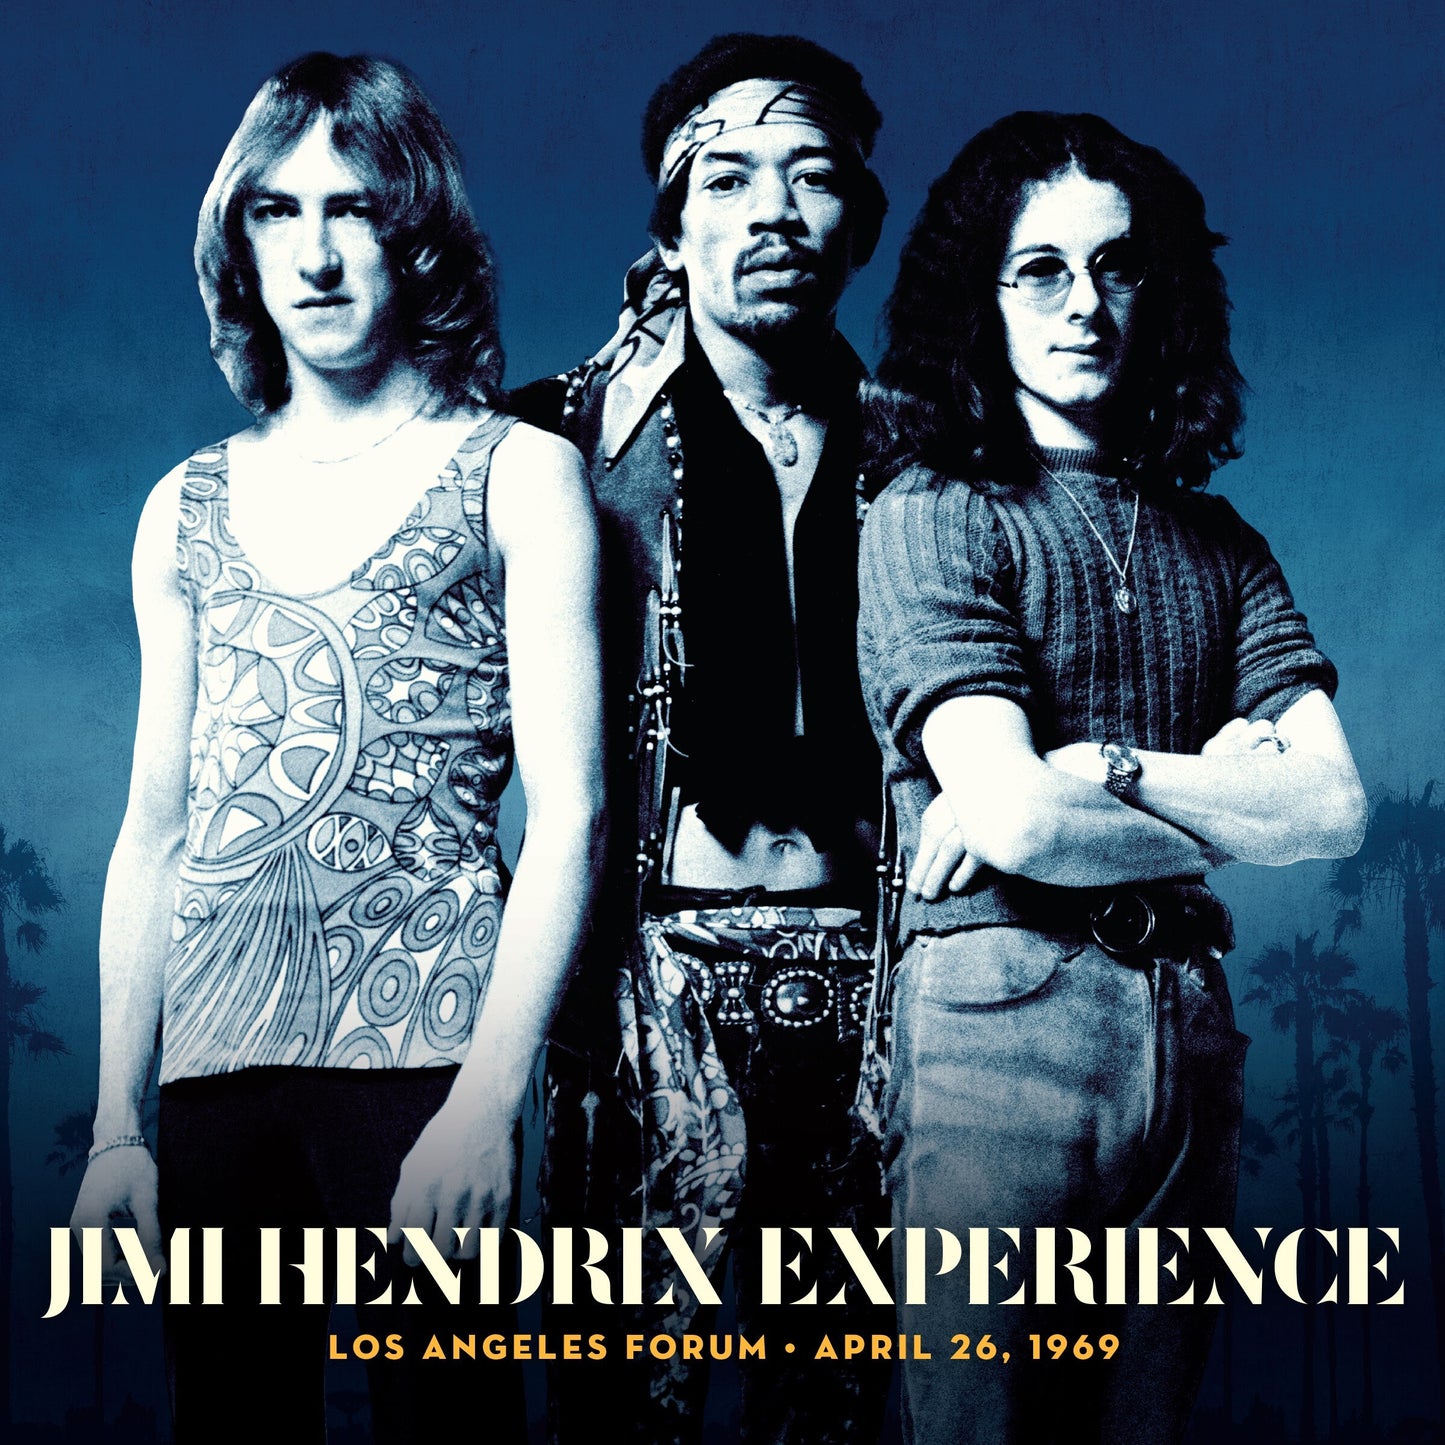 Jimi Hendrix Experience - Los Angeles Forum April 26, 1969 | Buy the vinyl LP from Flying Nun Records 